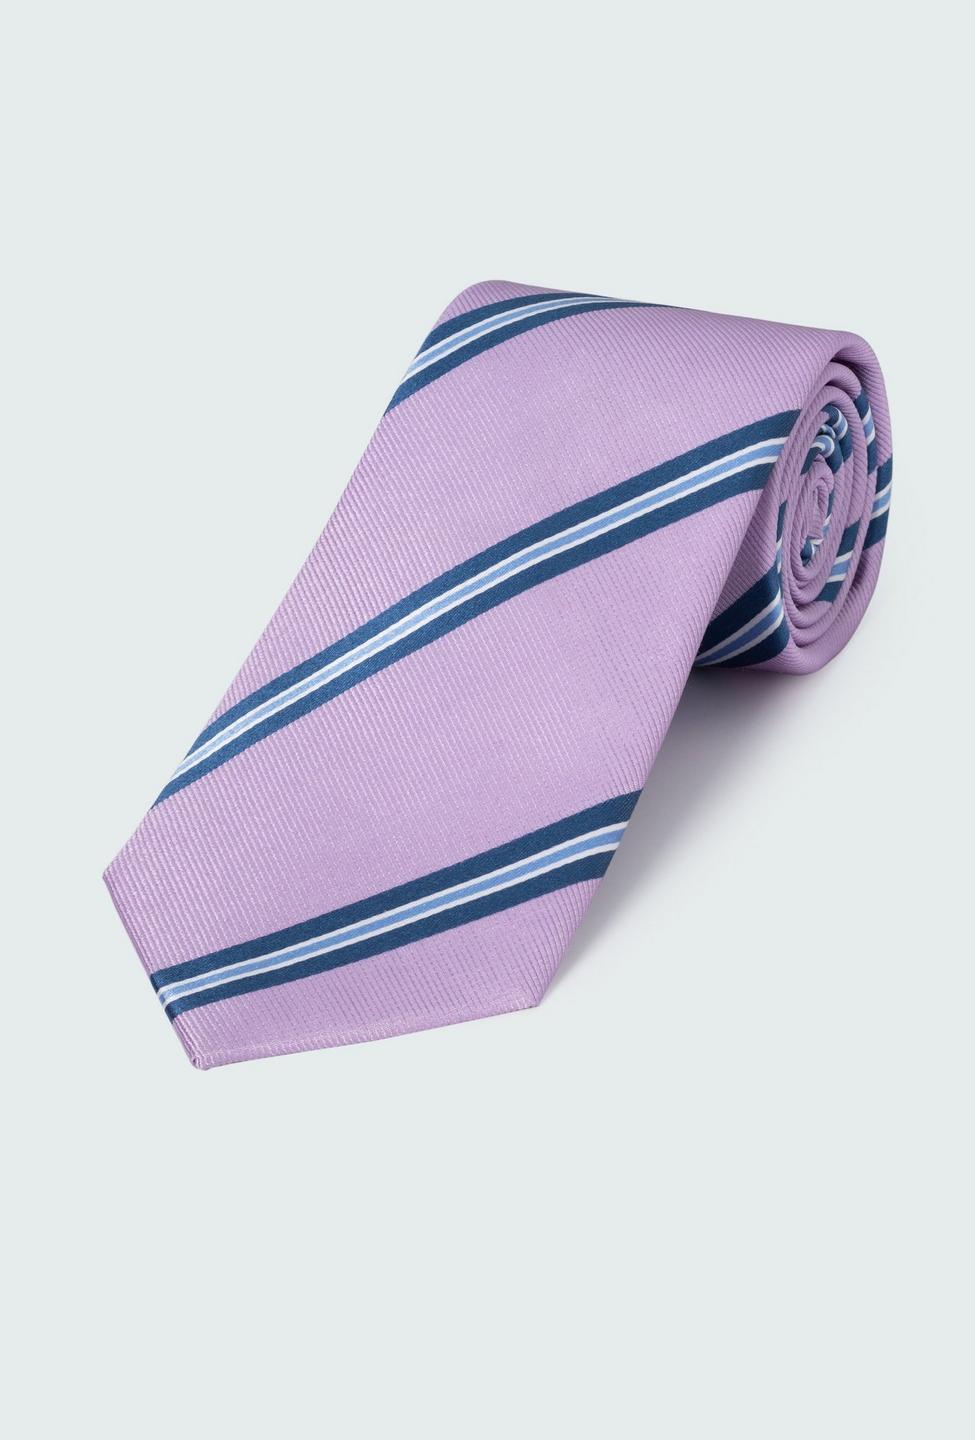 Pink tie - Striped Design from Indochino Collection